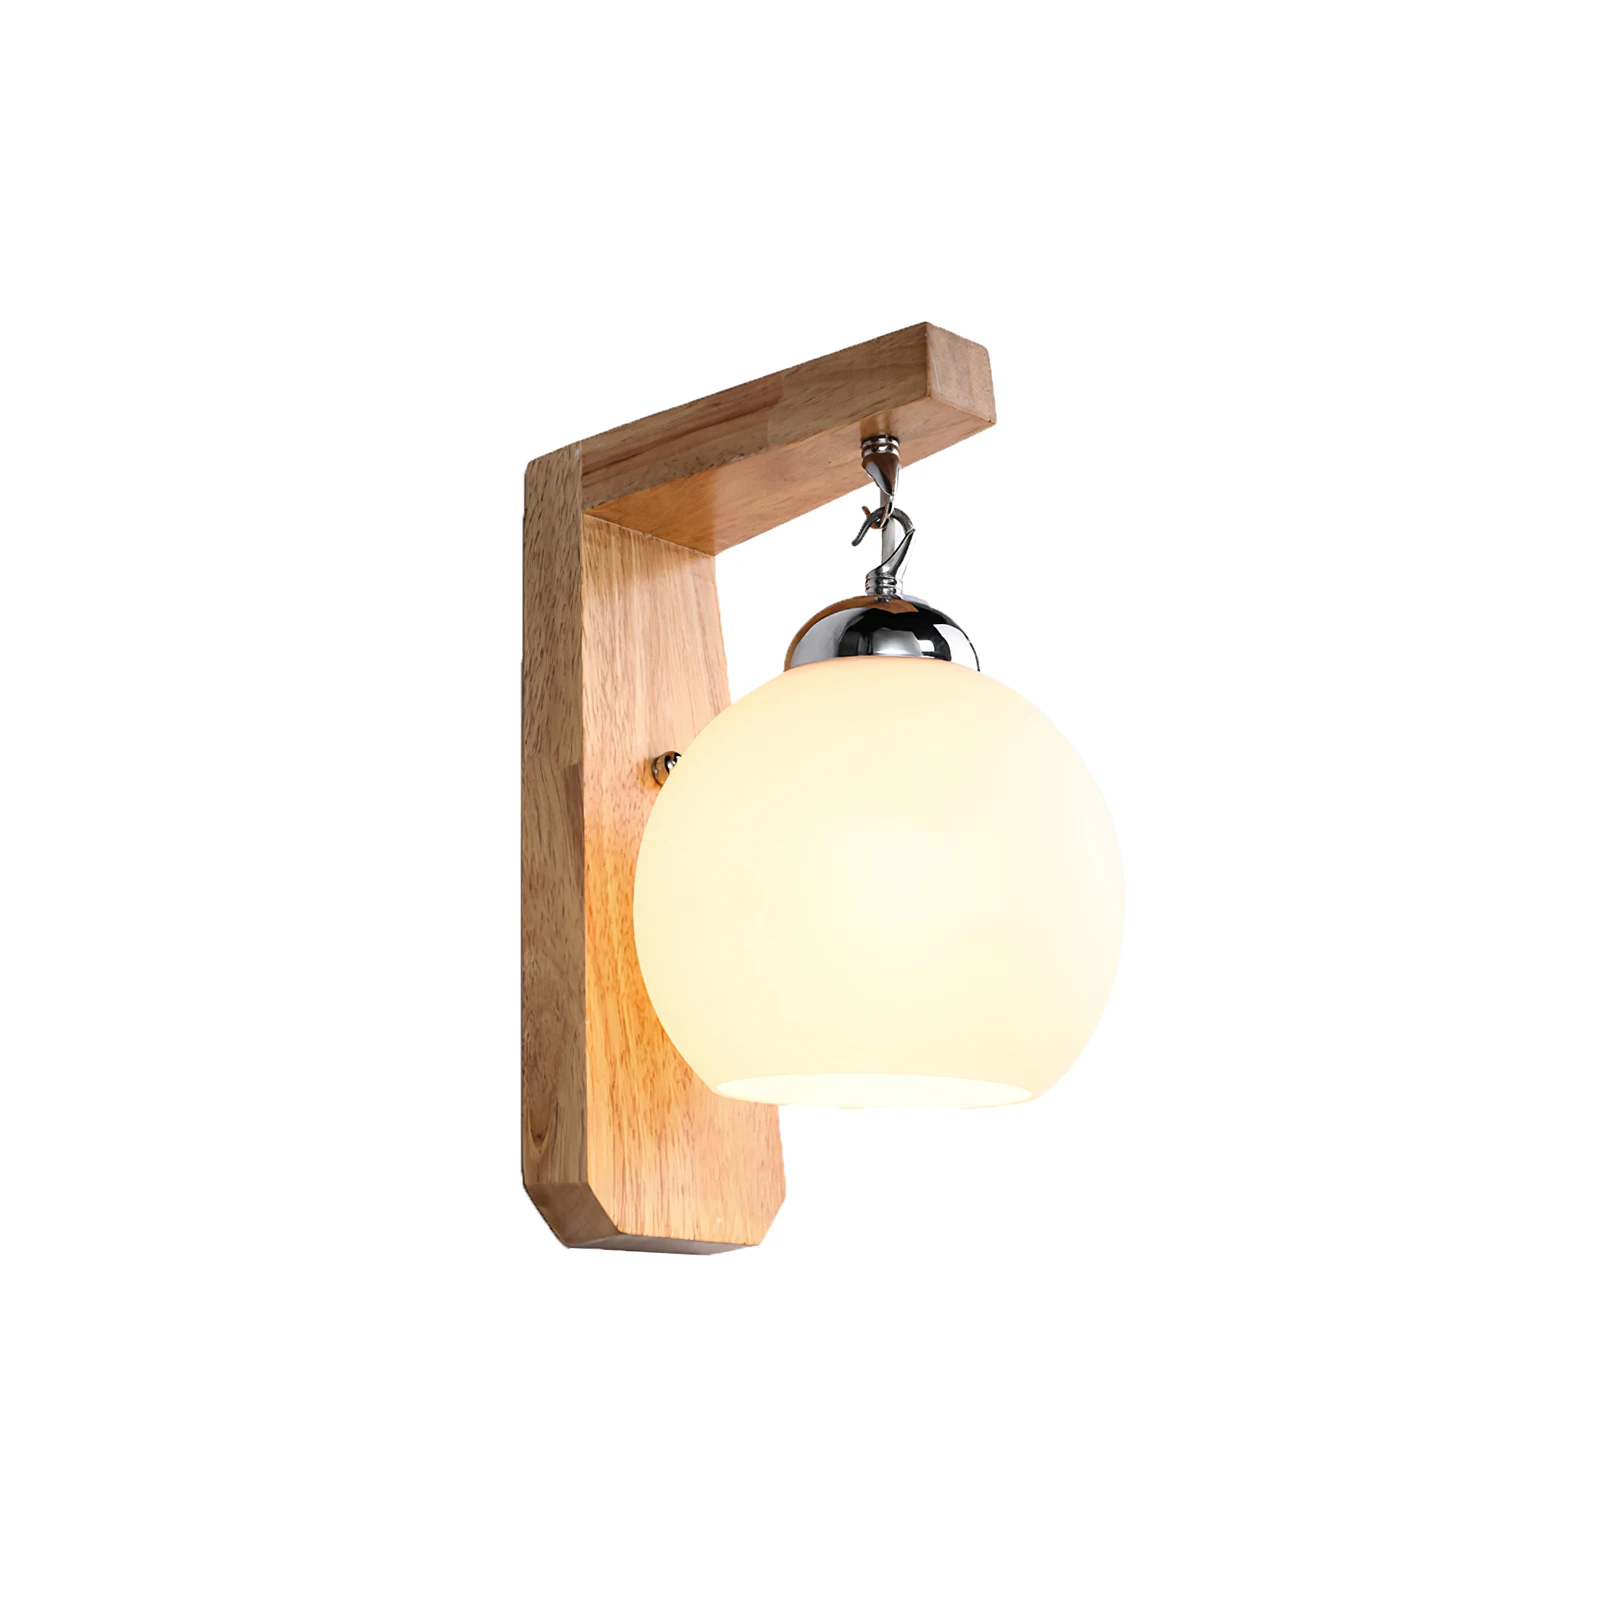 

Sturdy Wooden Wall Lamp E27 Wall Light High Quality Decorative Wall Lamp Modern For Home Living Room